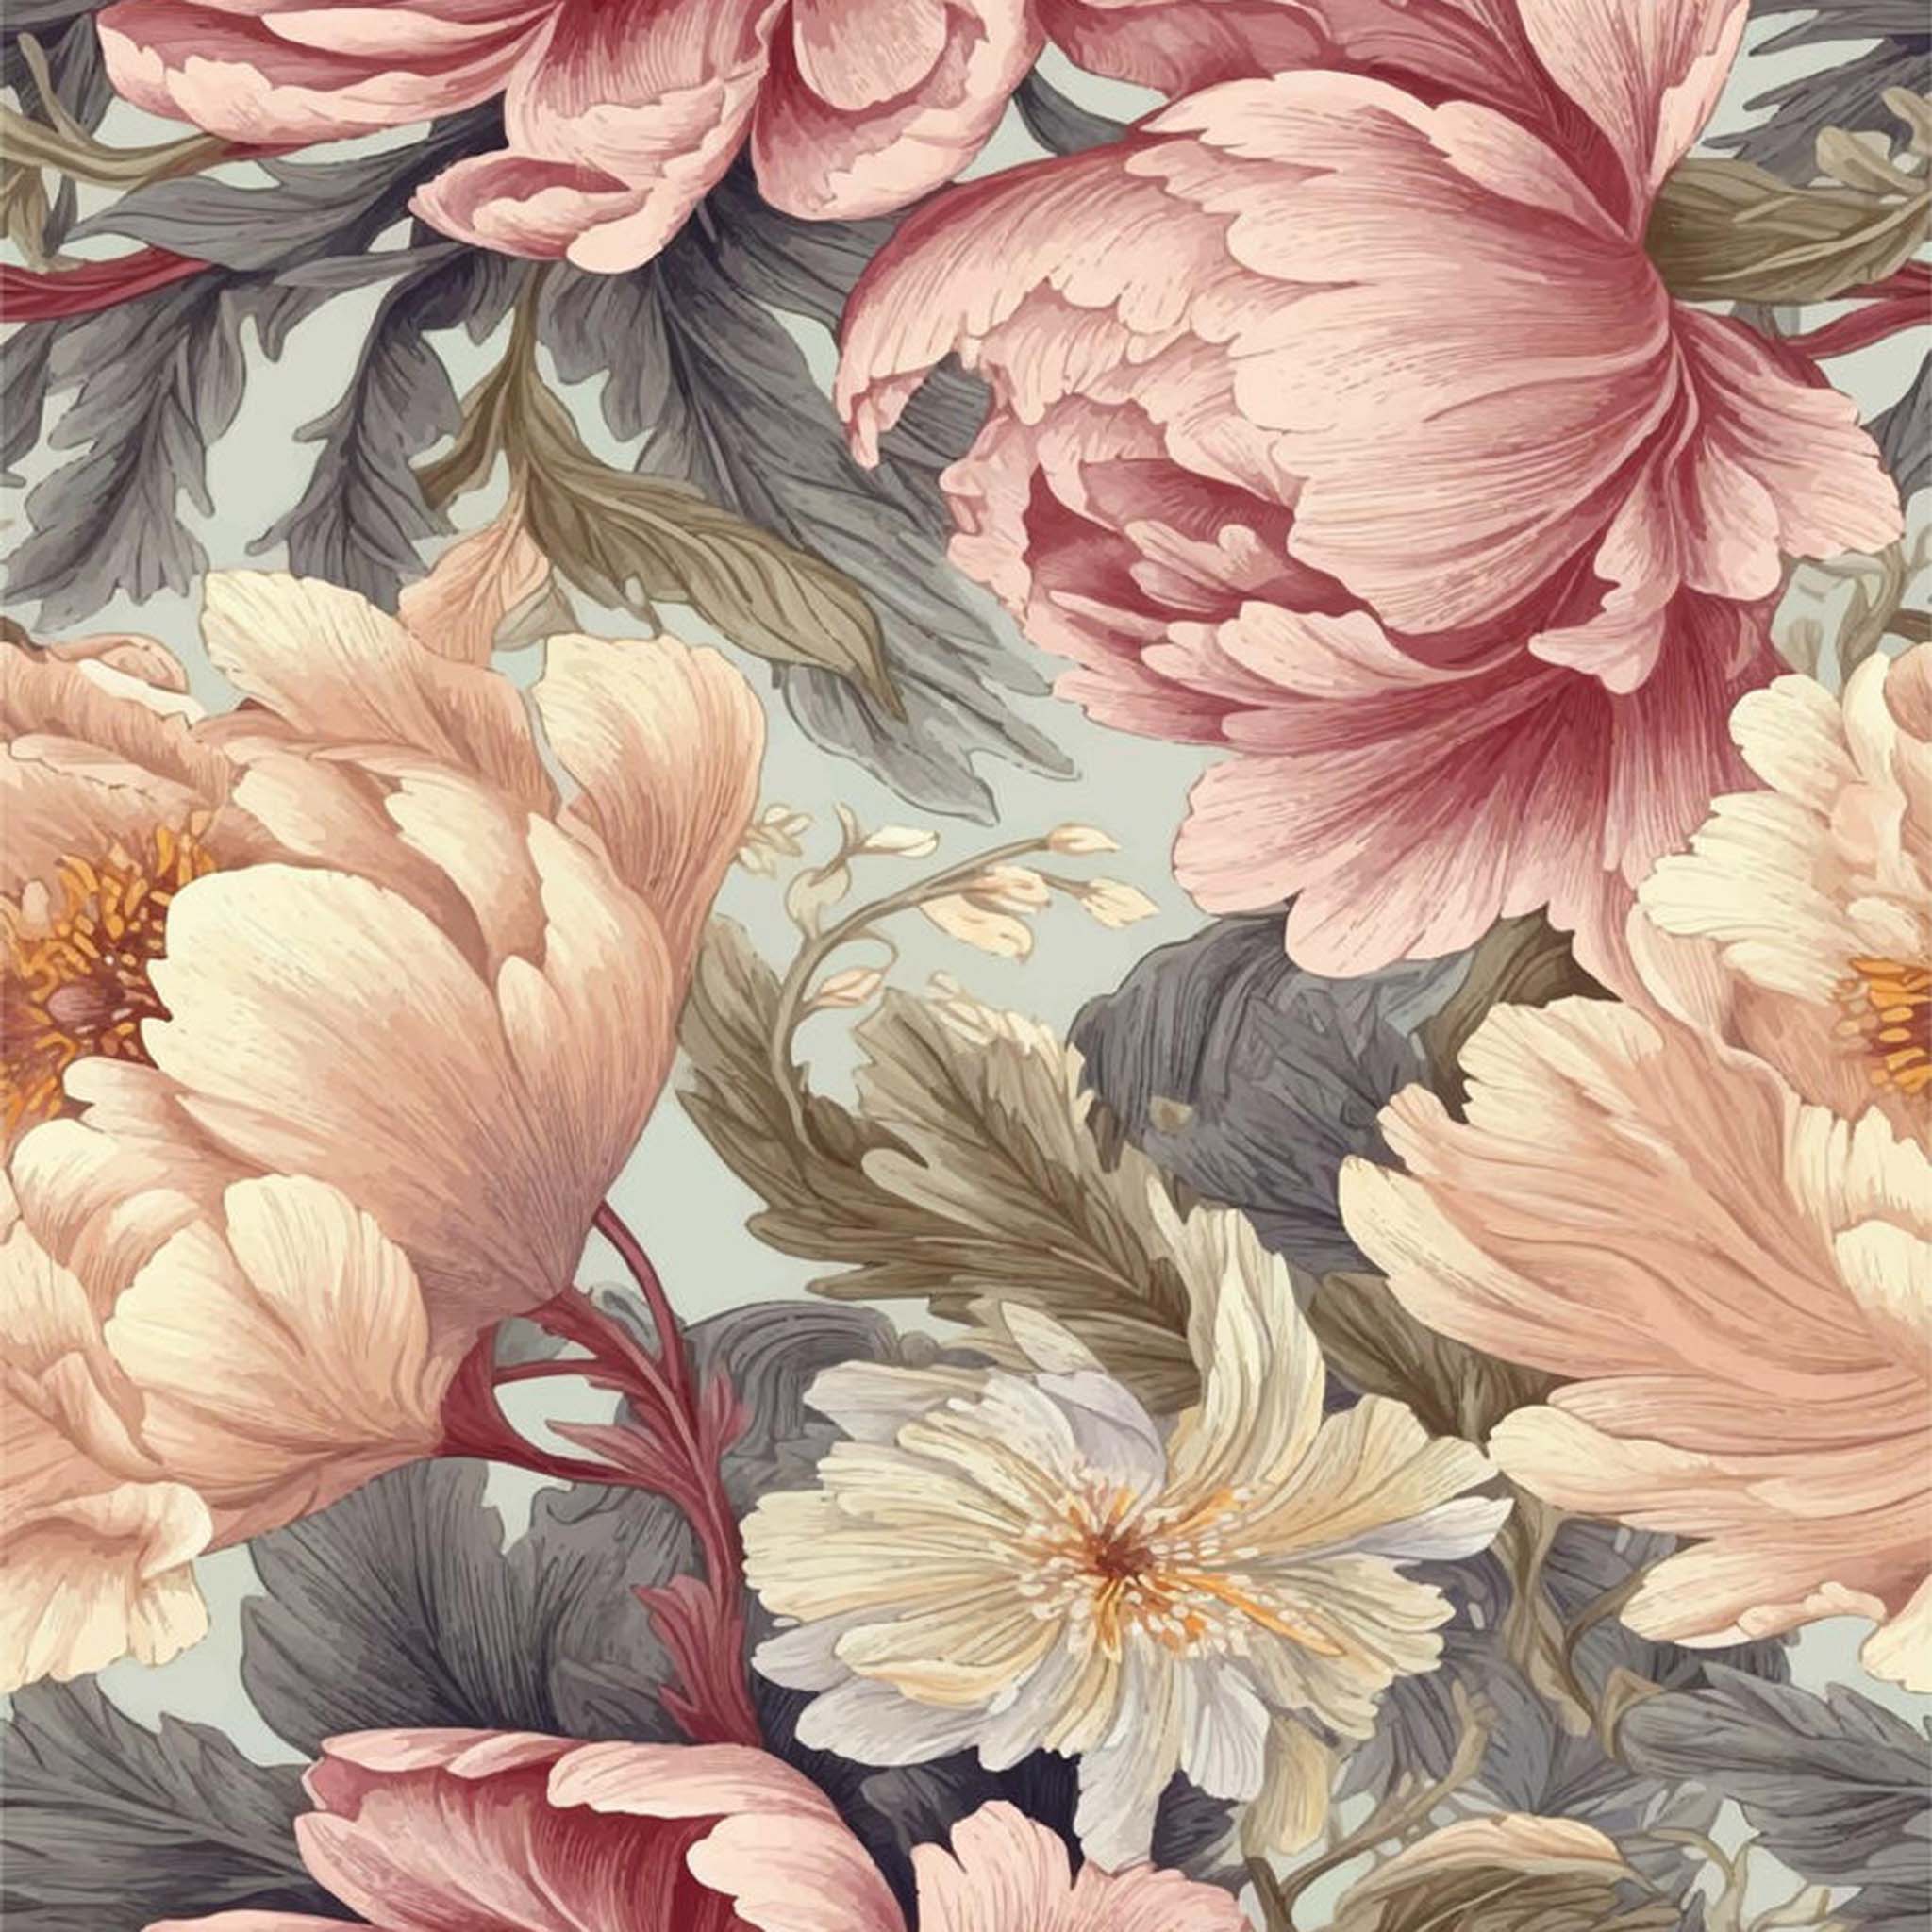 Close-up of an A1 rice paper design that features large peonies in shades of pink, cream, and blue on a pale blue background.